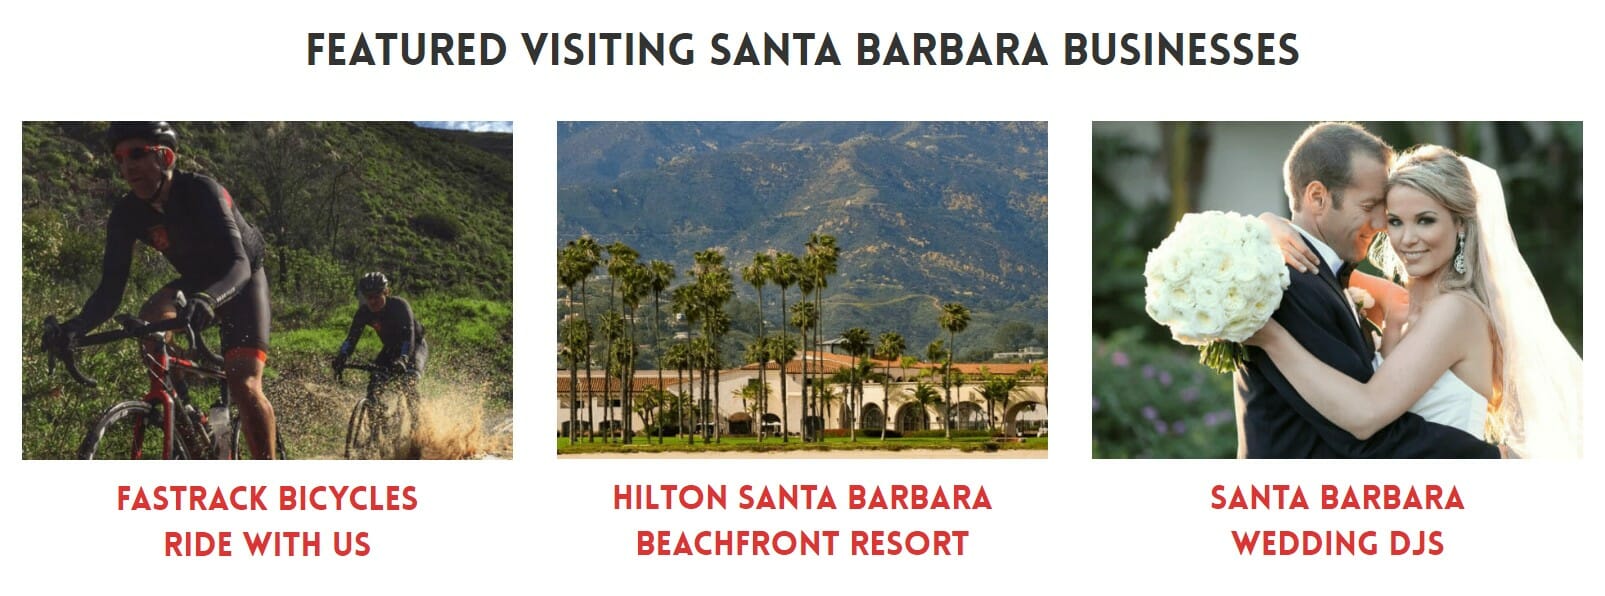 https://visitingsantabarbara.com/wp-content/uploads/Home-Page-Featured-Listings.jpg